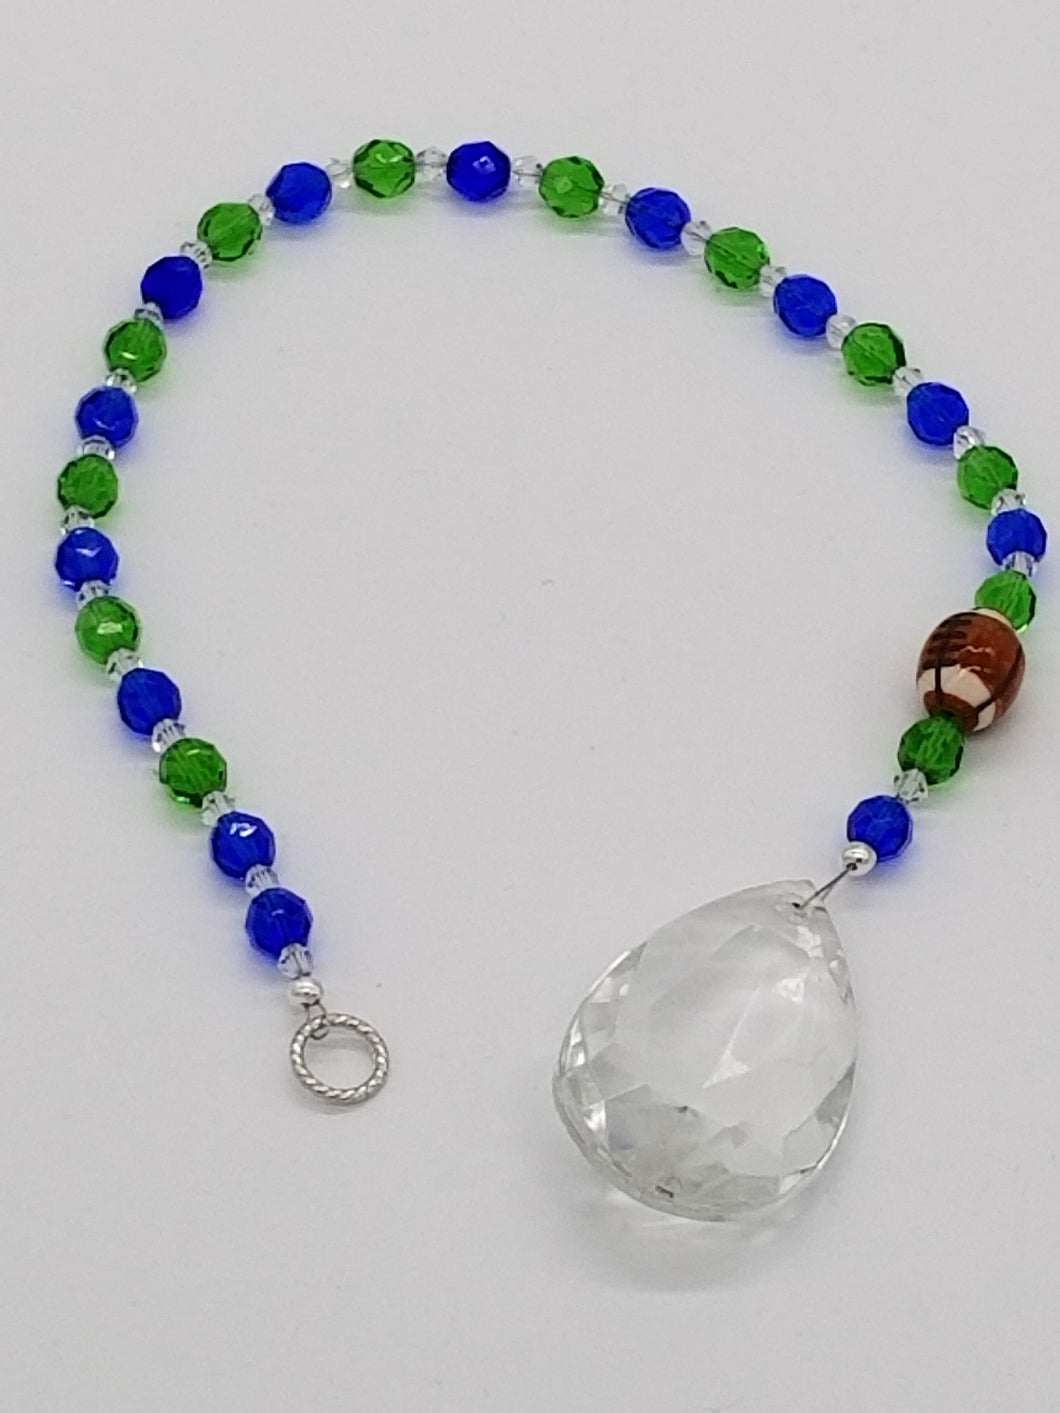 Football Bead and Blue and Green Suncatcher